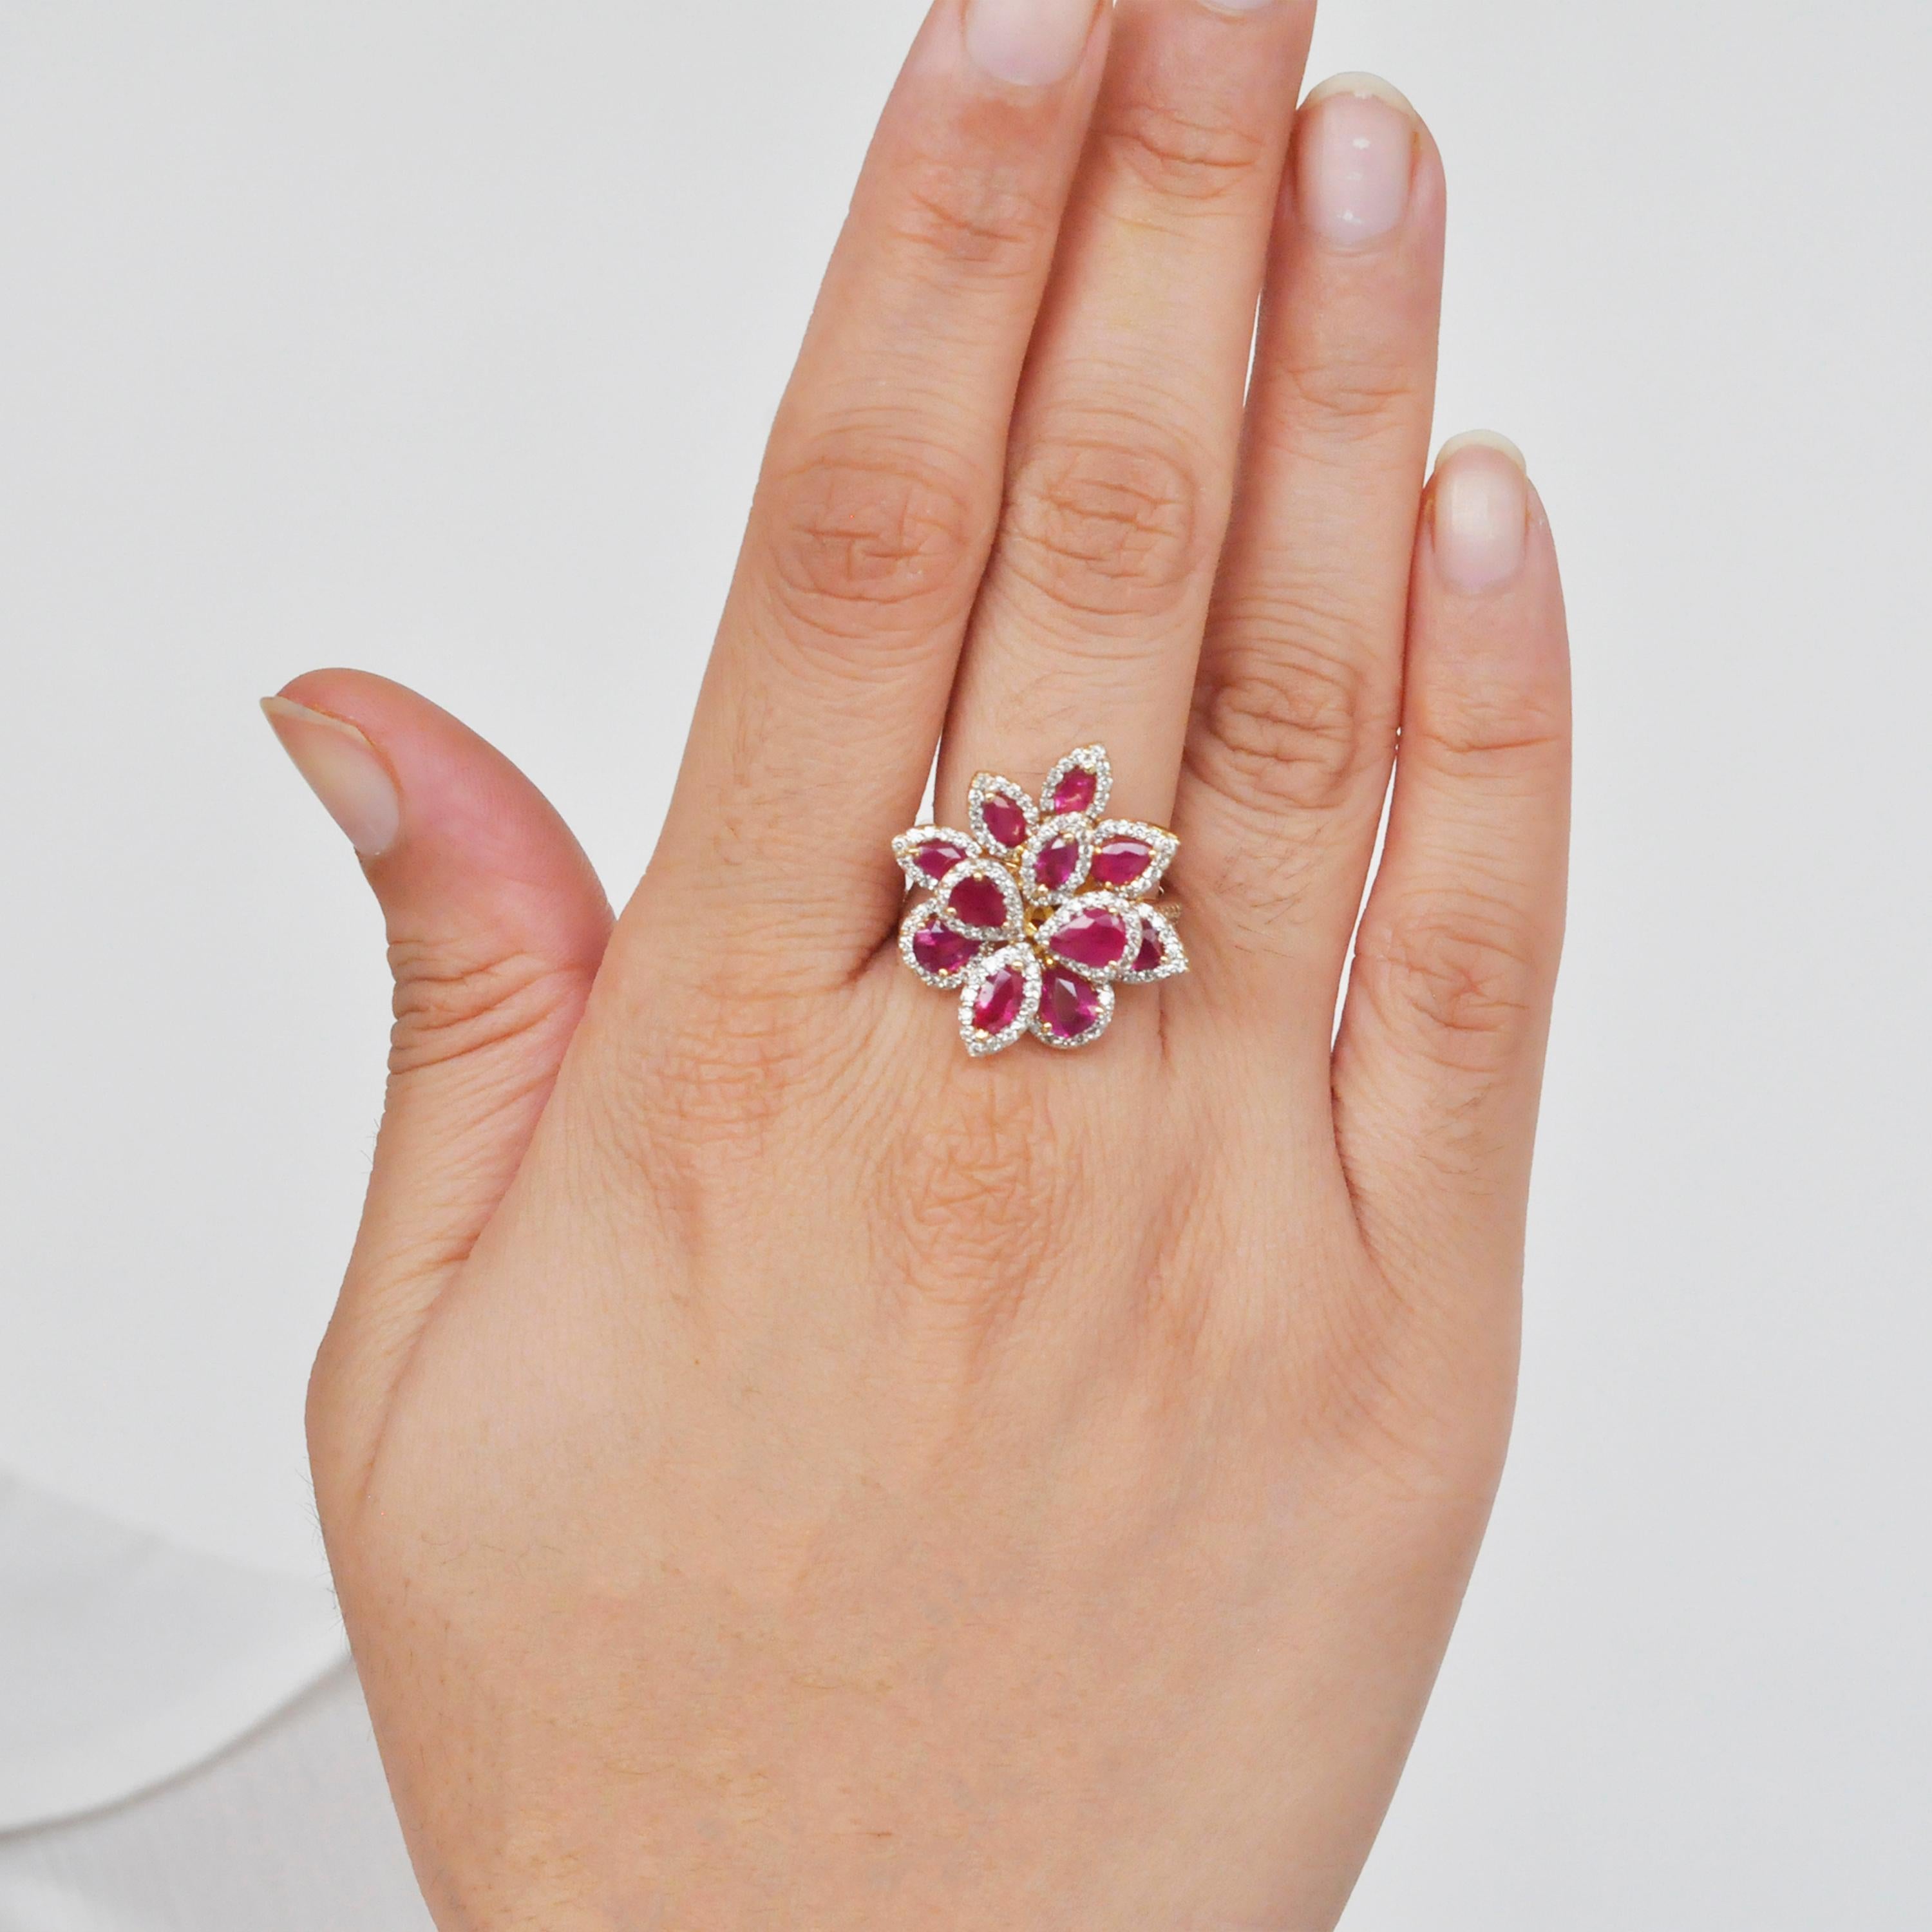 18 karat yellow gold pear marquise ruby flower diamond cocktail ring. 

This enchanting red ruby and diamond flower cocktail ring is impressive. The cluster is created with
alternating pear and marquise shaped red rubies along with sparkling VVS/VS